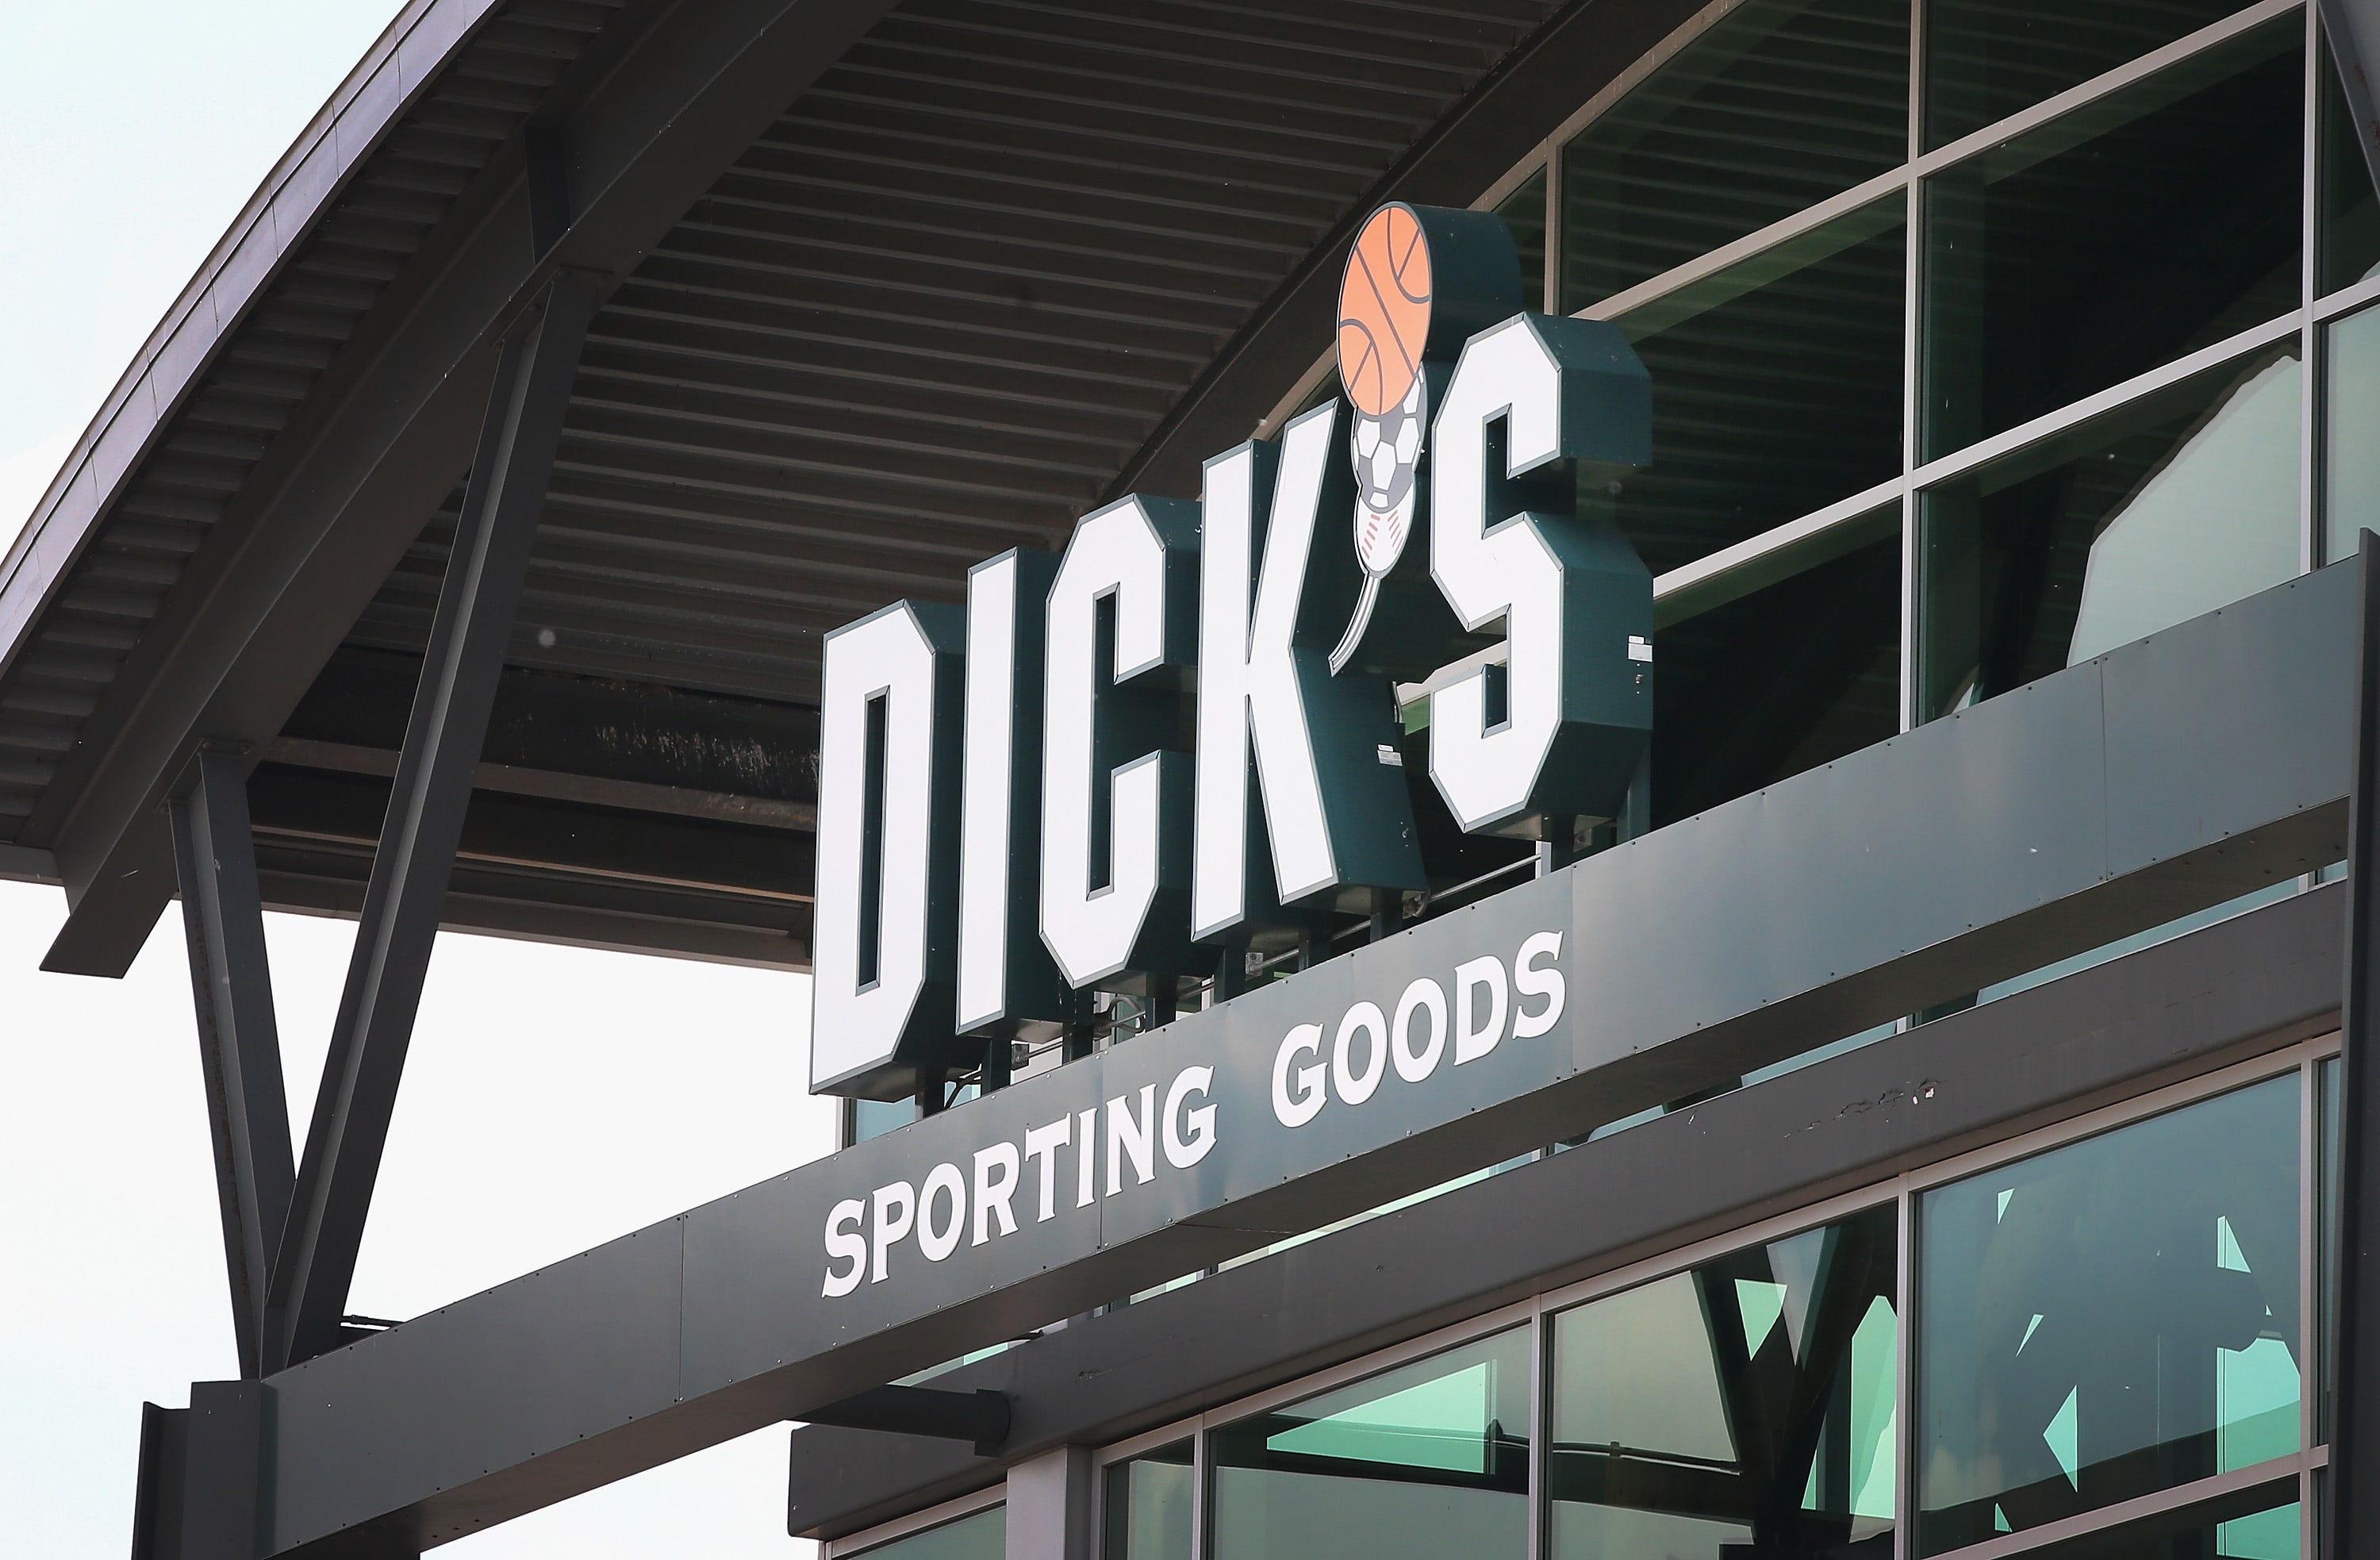 Cramer sees potential in Dick’s Sporting Goods, despite the quarter’s decline